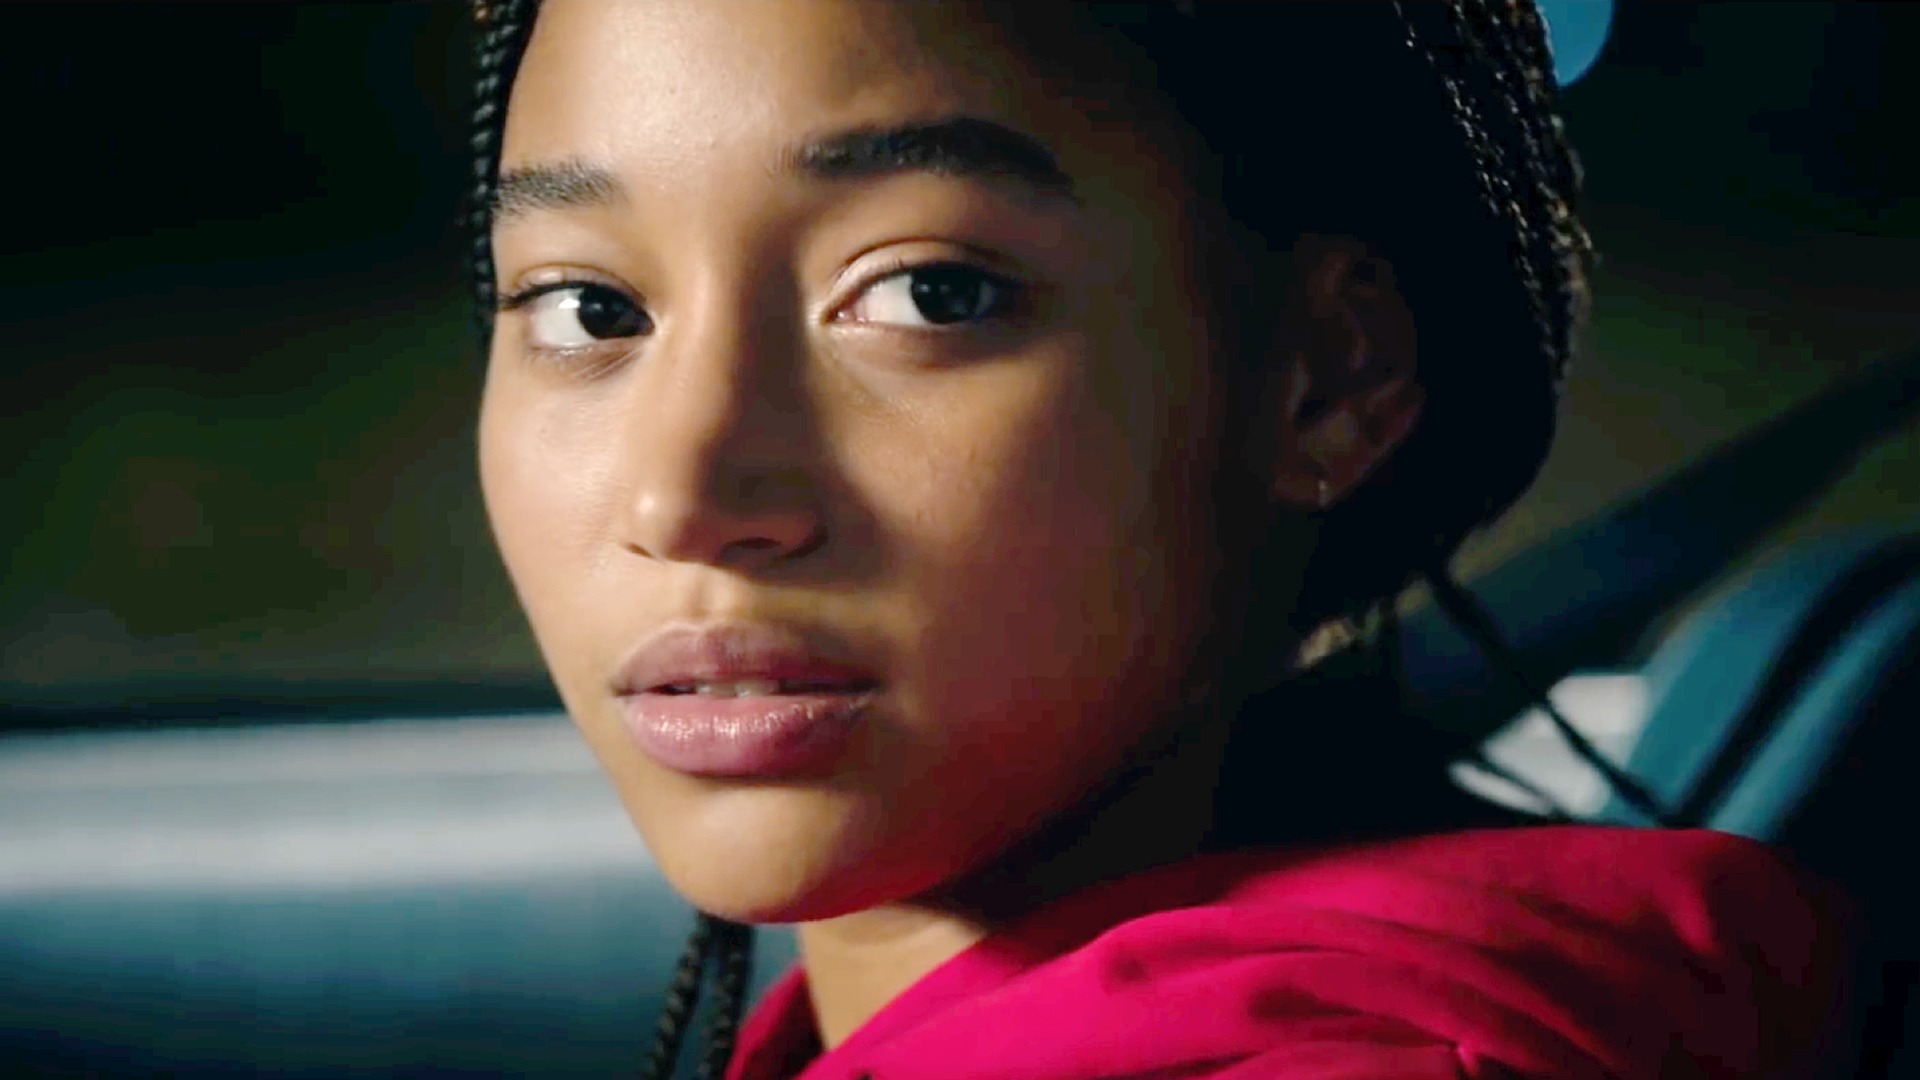 The Hate U Give Why Its The Teen Movie We All Need To See Review Ph